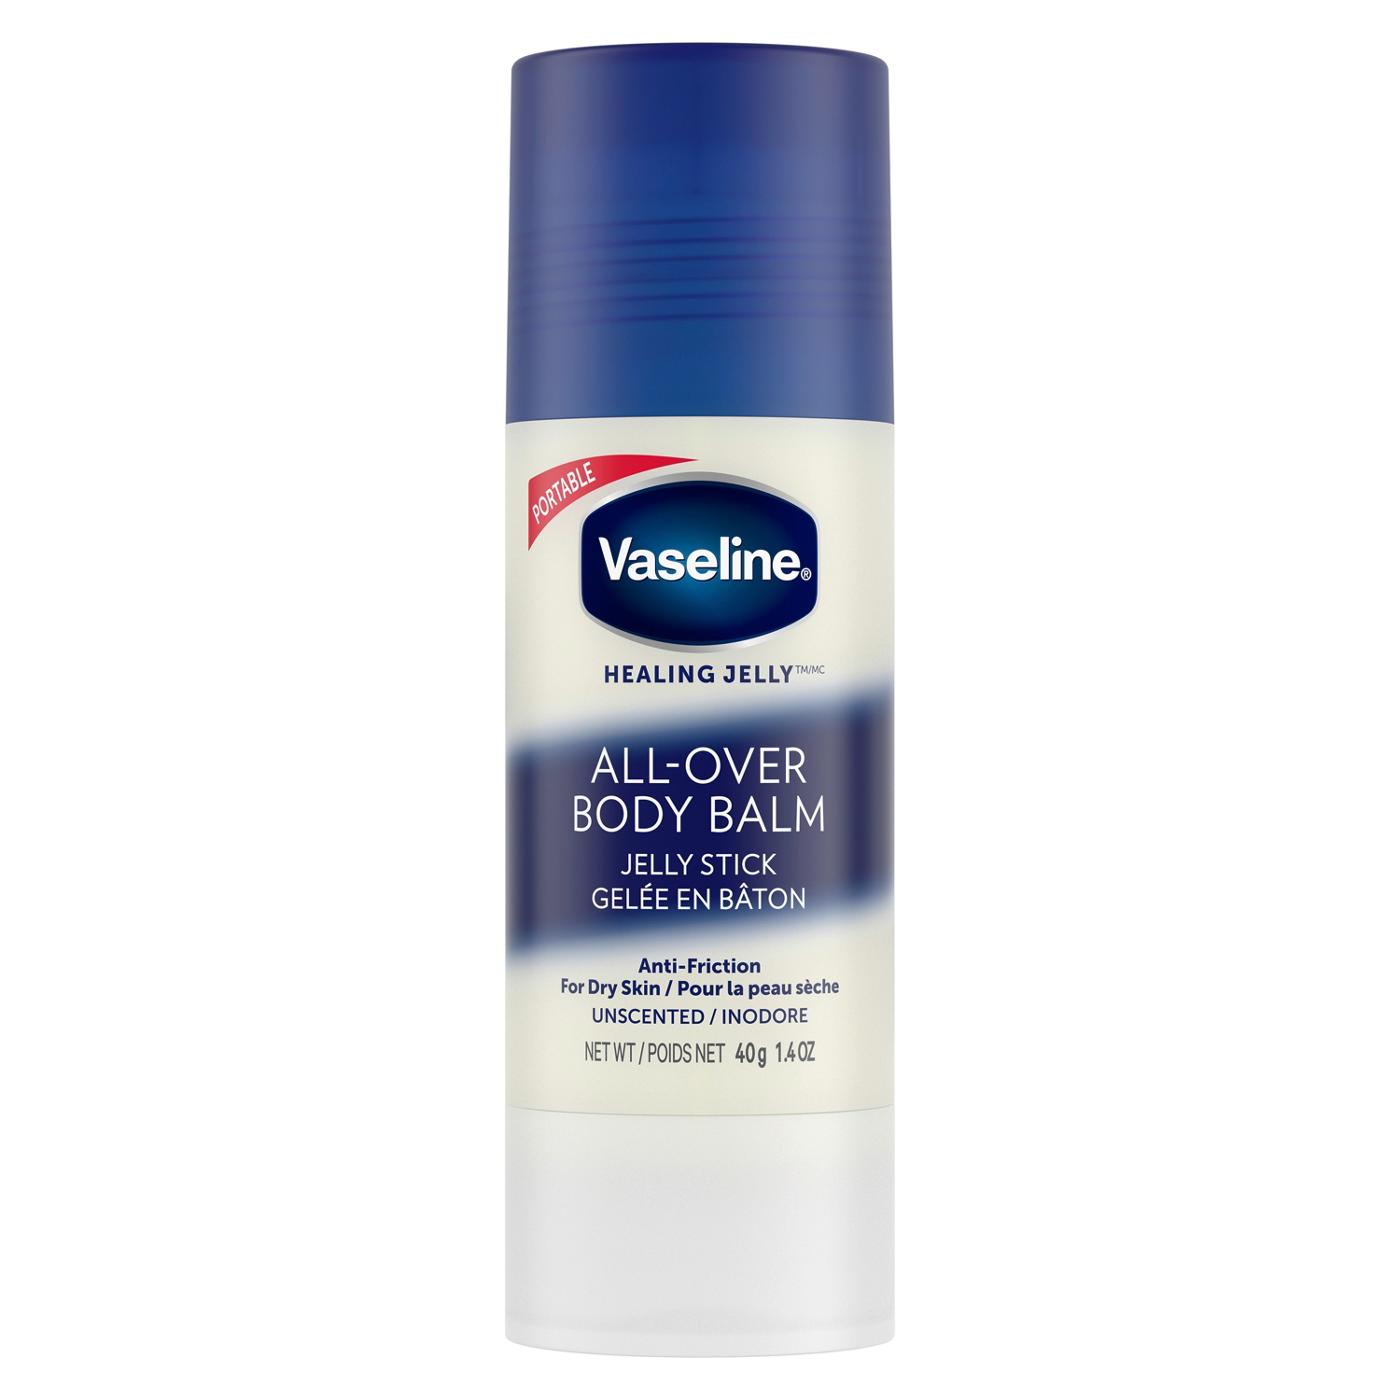 Vaseline Healing Jelly Unscented Body Balm Stick; image 1 of 3